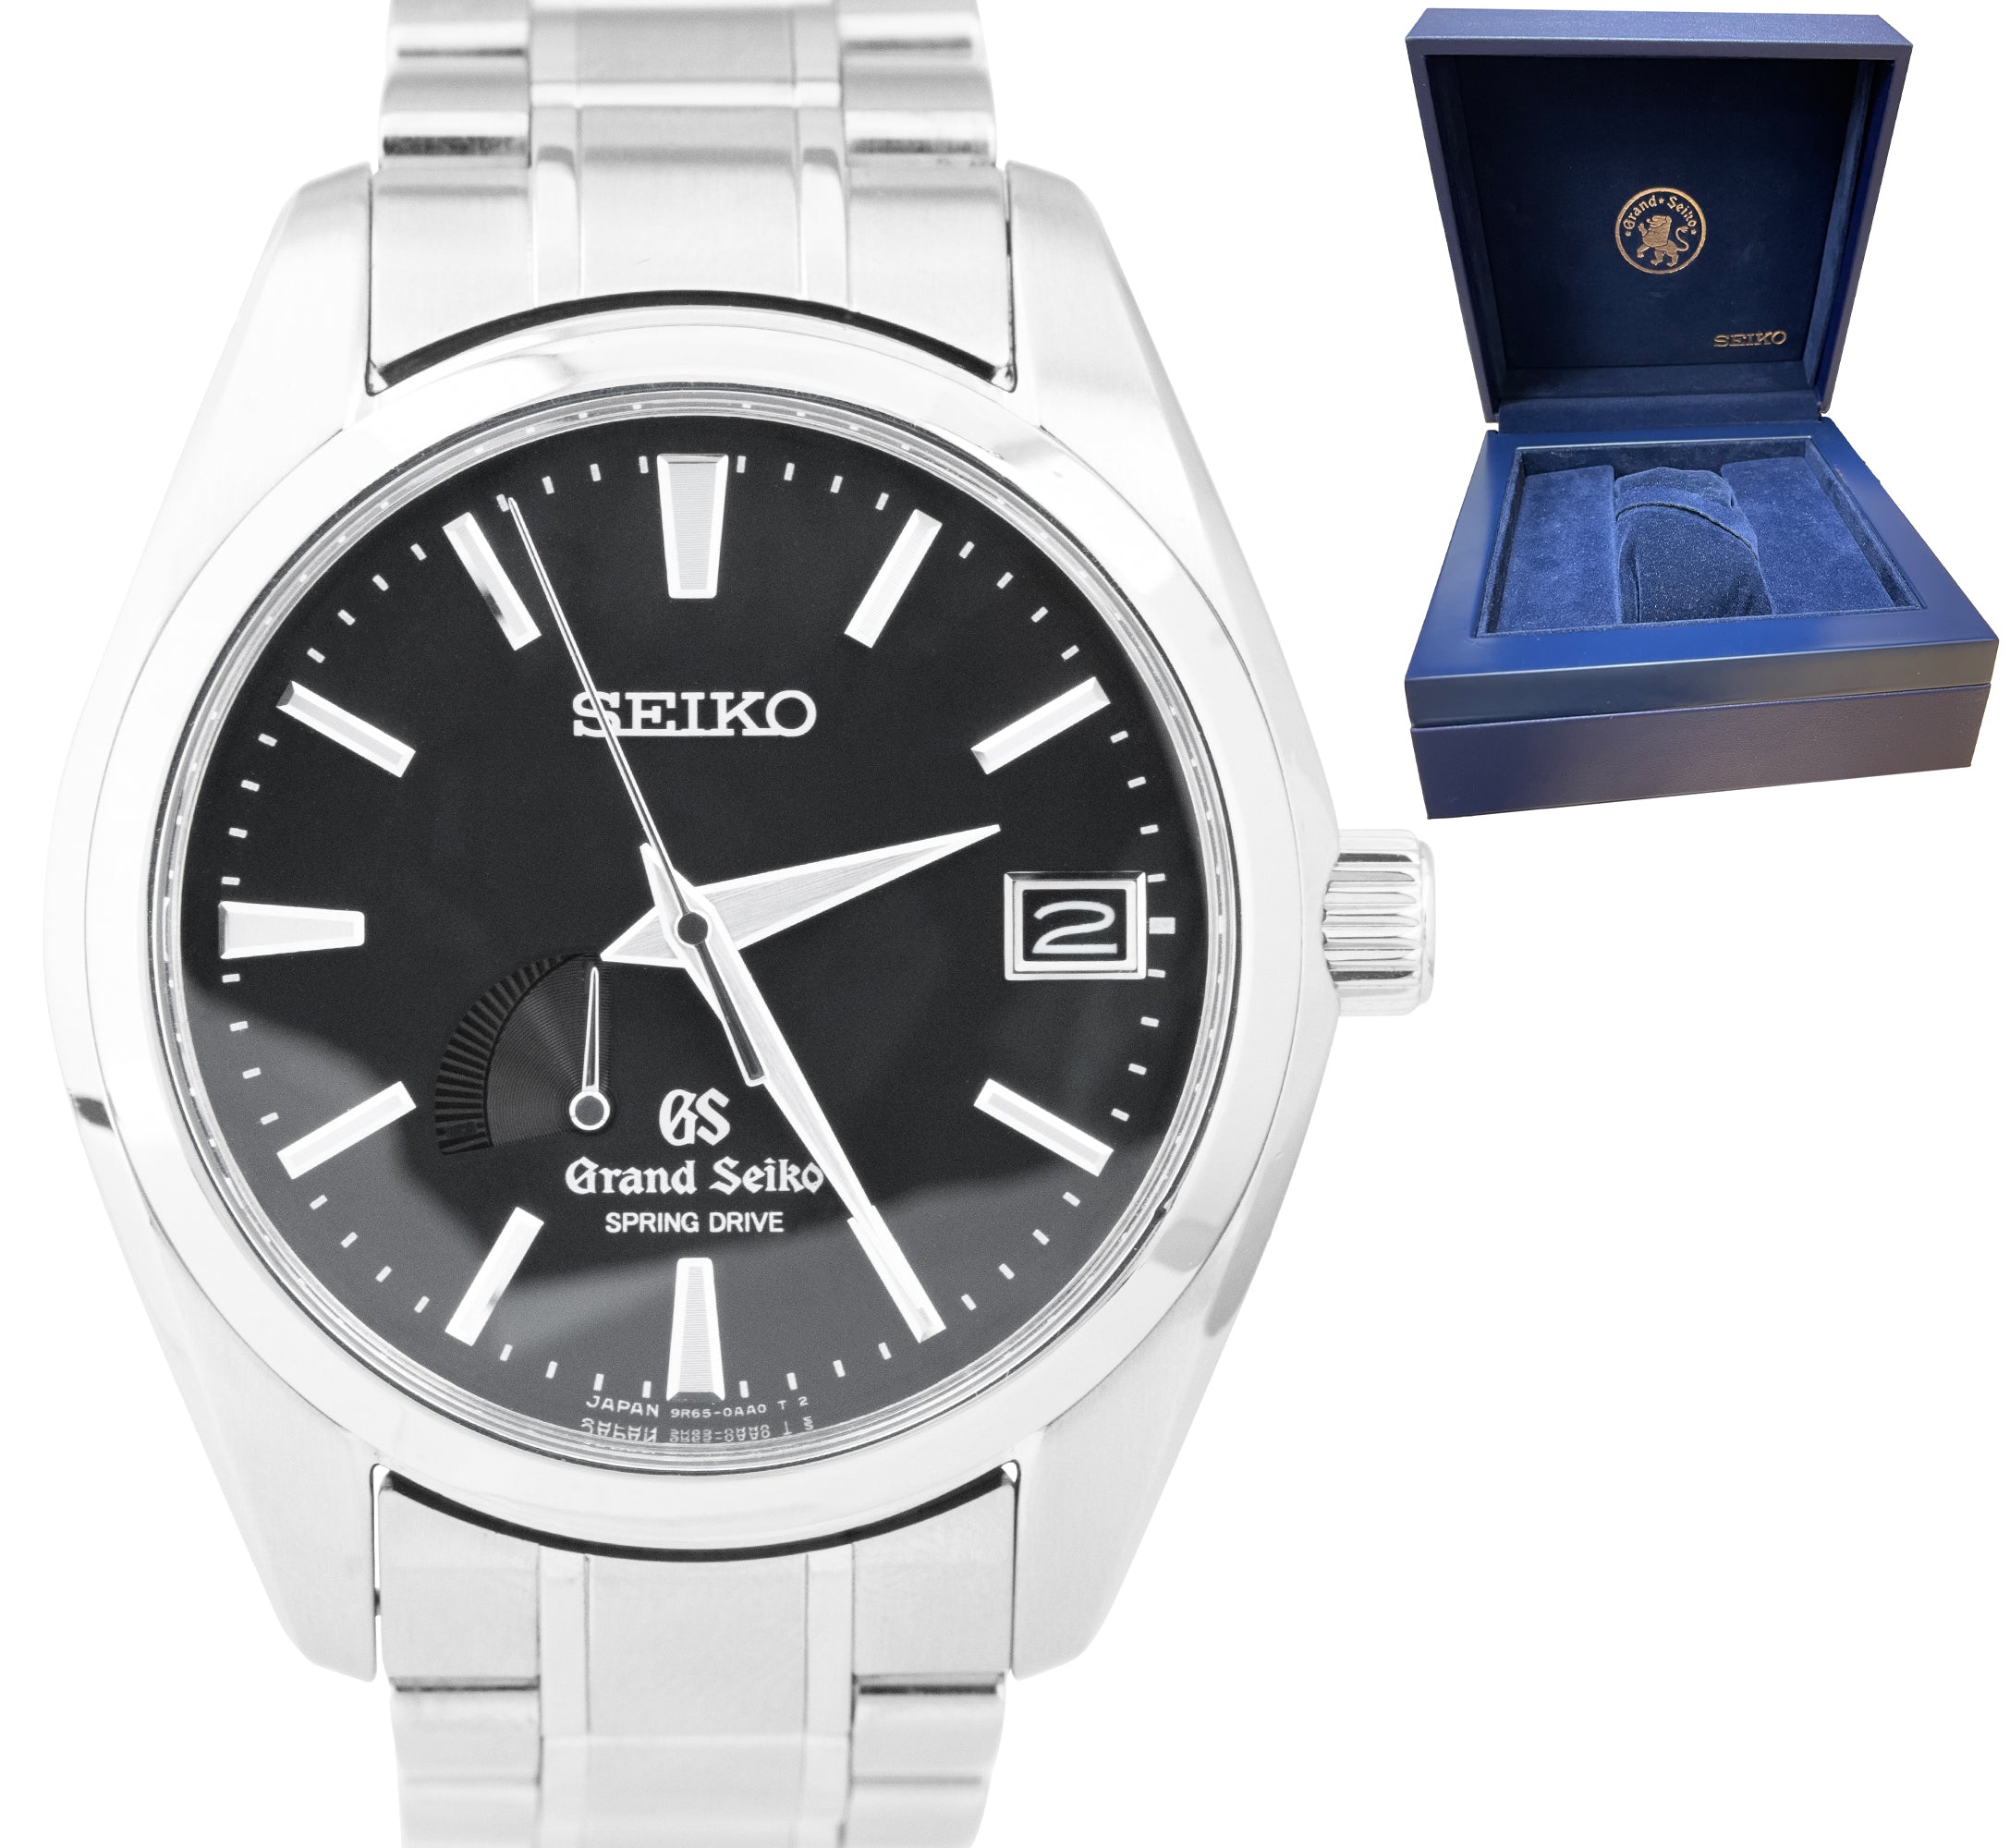 Grand Seiko Spring Drive 40mm Stainless Steel Black Automatic Watch SB